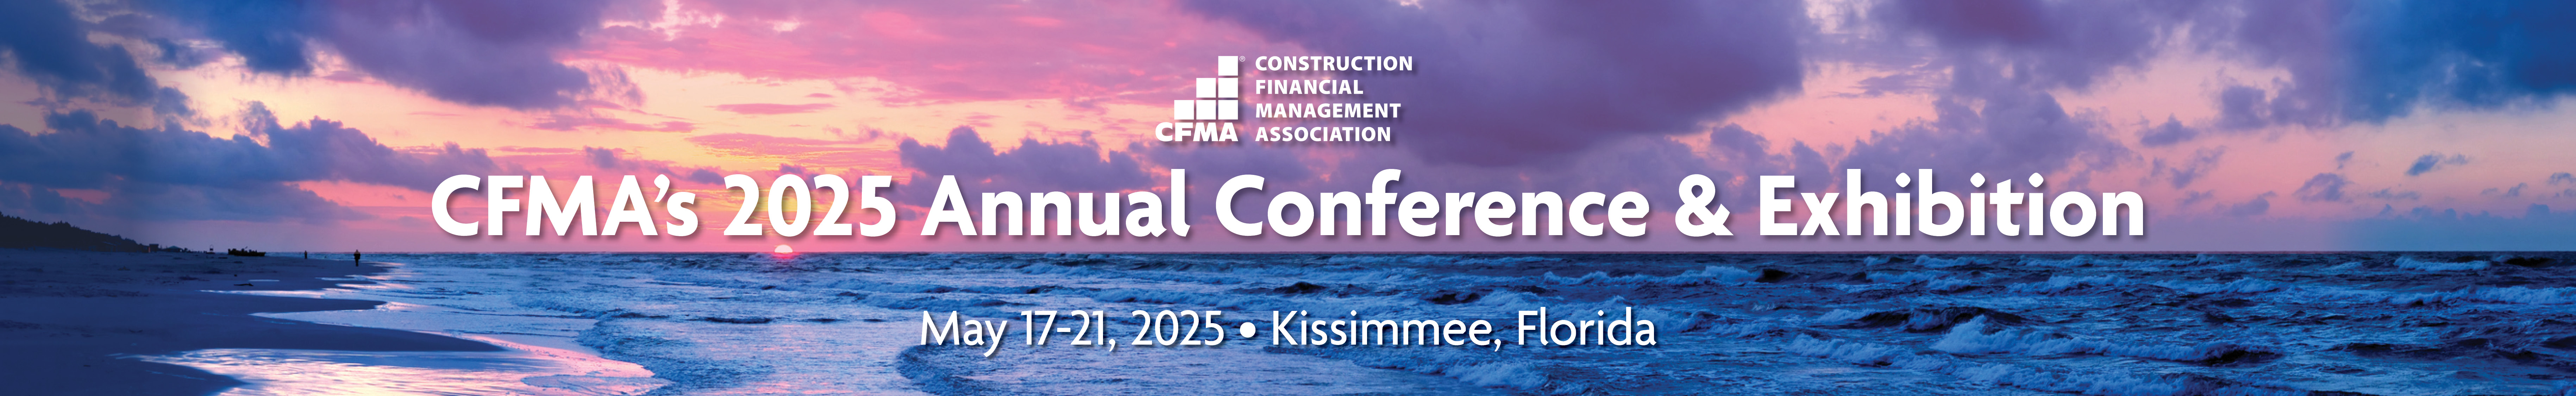 CFMA’s Annual Conference & Exhibition